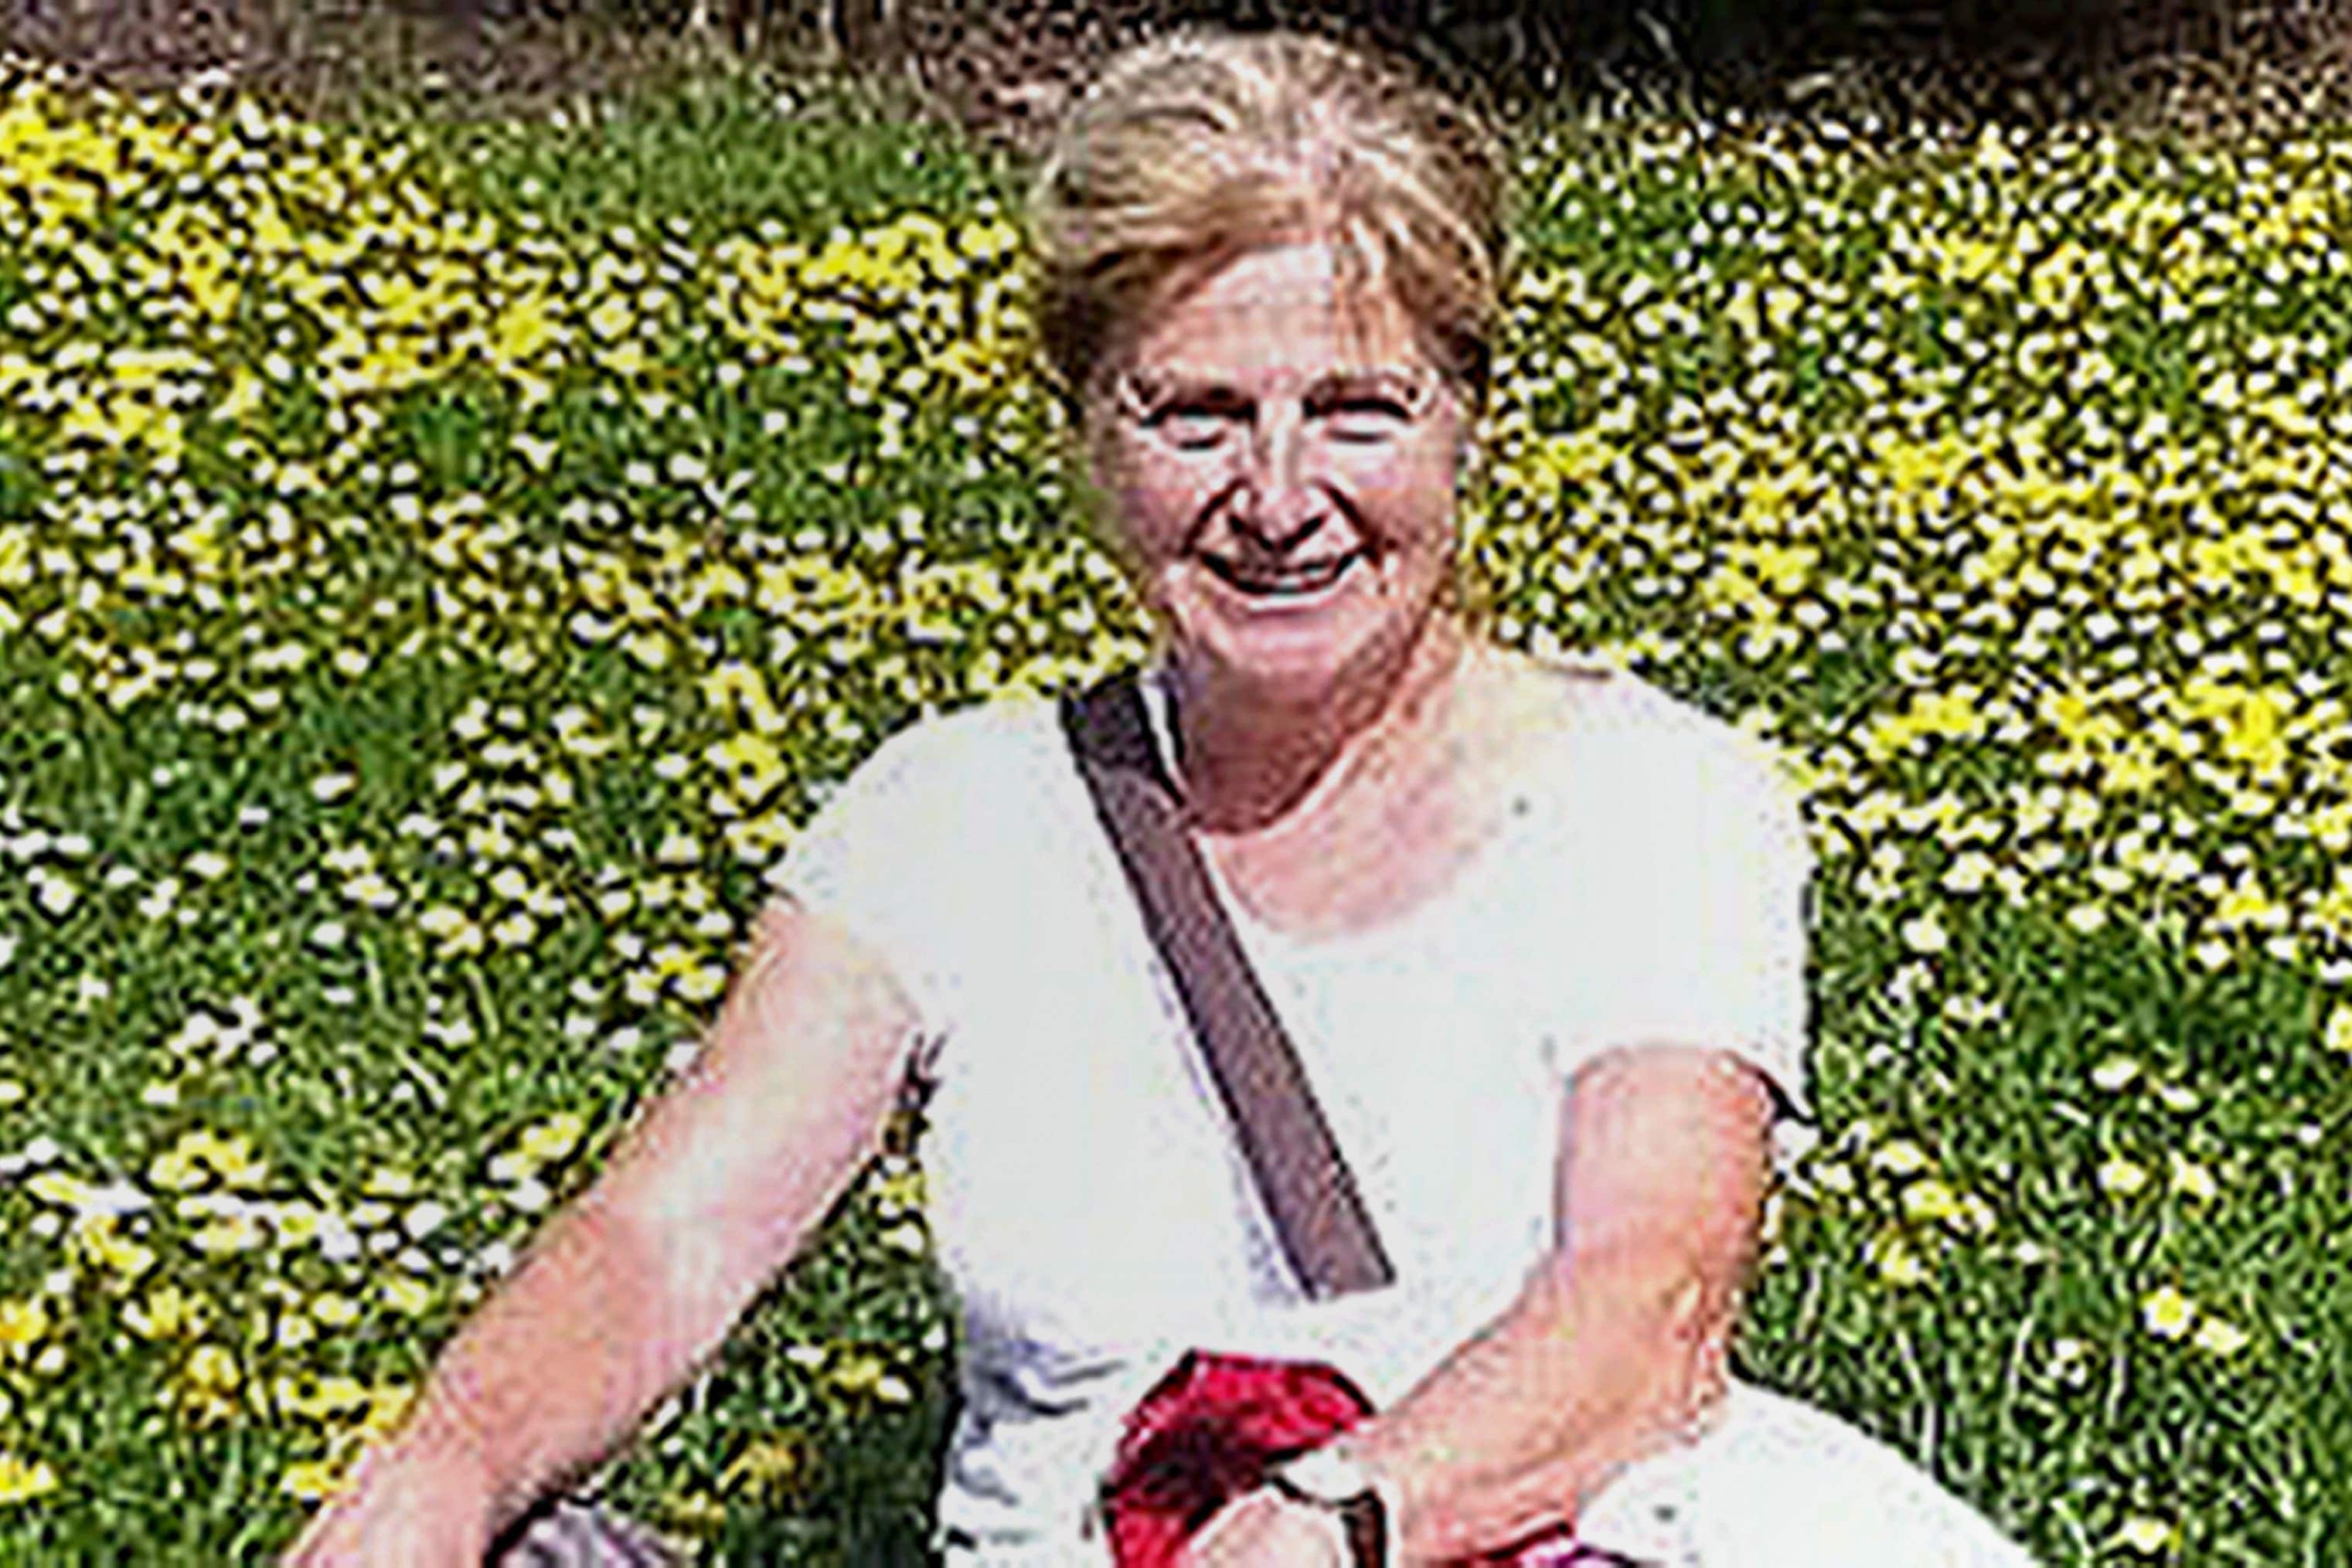 Danielle Carr-Gomm, 71, died while attending a slapping therapy workshop at a country hotel